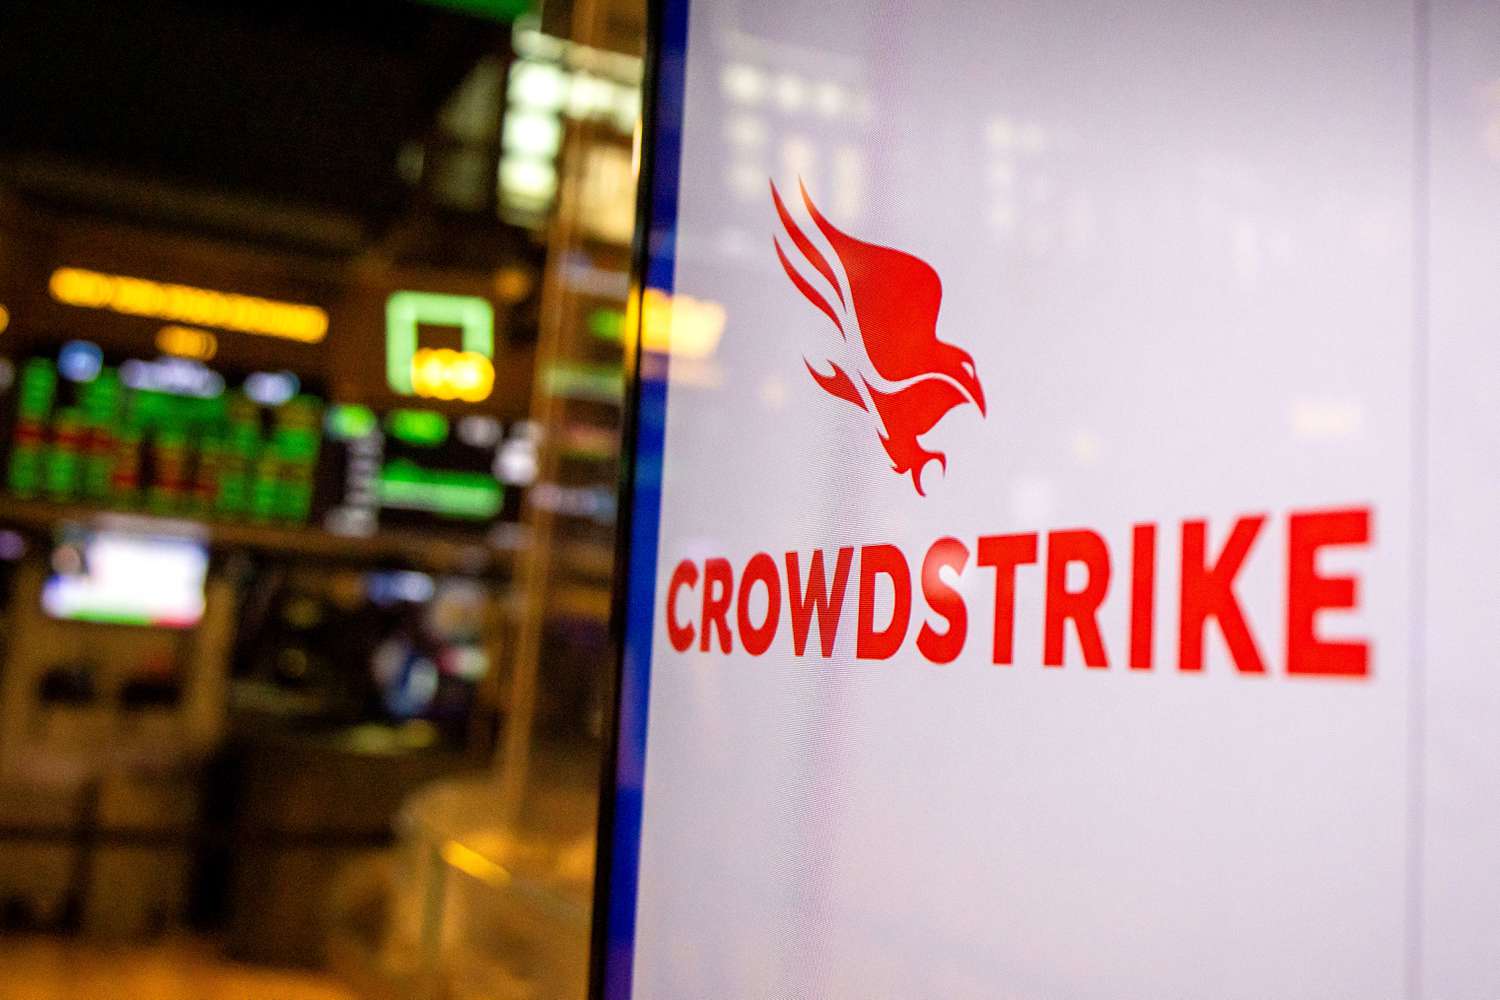 These Cybersecurity Stocks Could Gain From Fallout After CrowdStrike Outage, Analysts Say [Video]